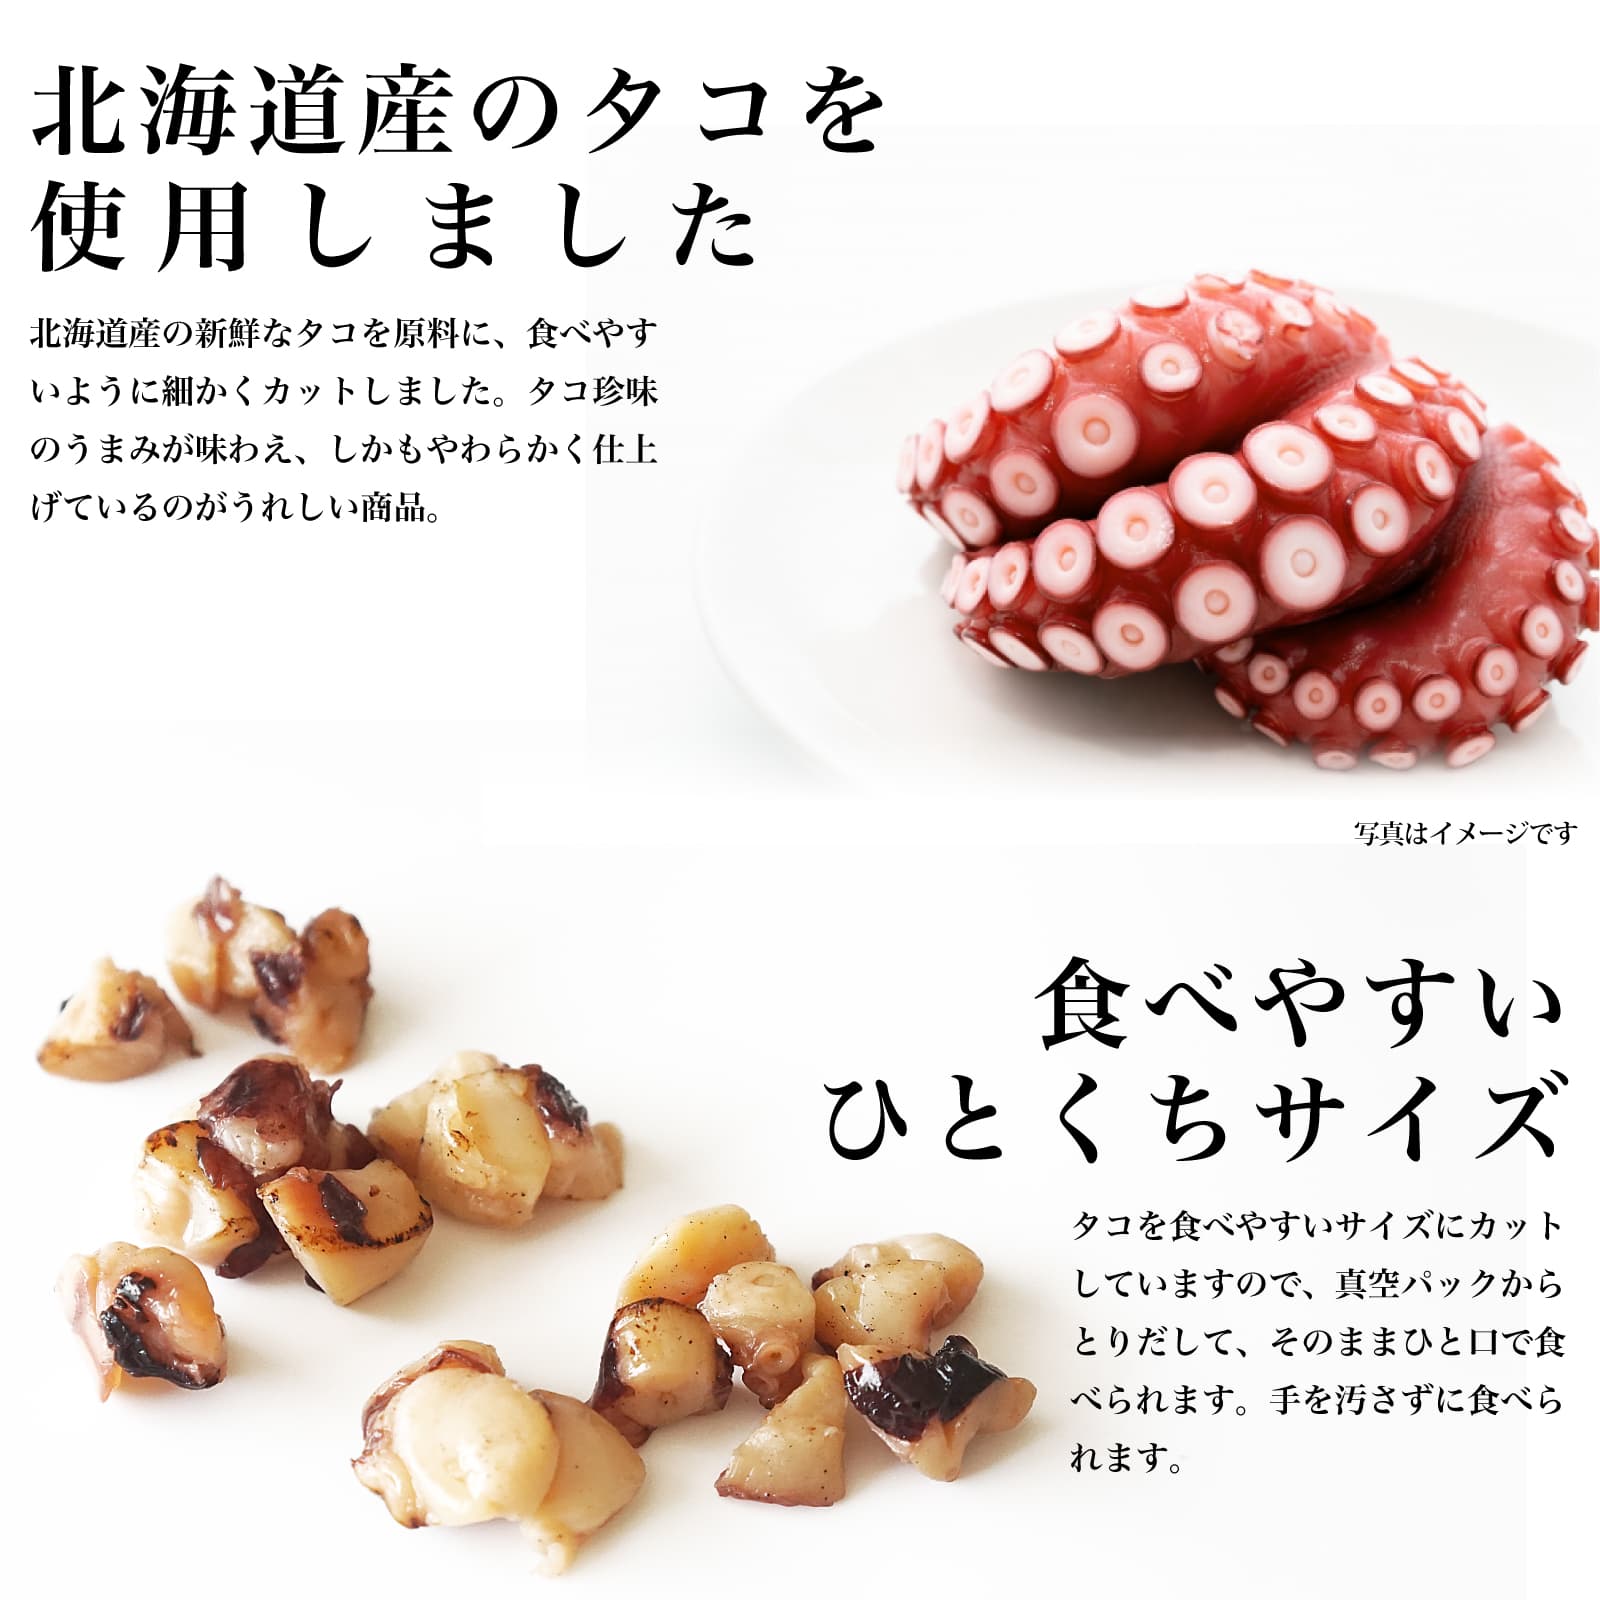  taste .. snack octopus 250g soft . soft meal feeling .... taste .. Hokkaido production ...... size piece packing high capacity business use 